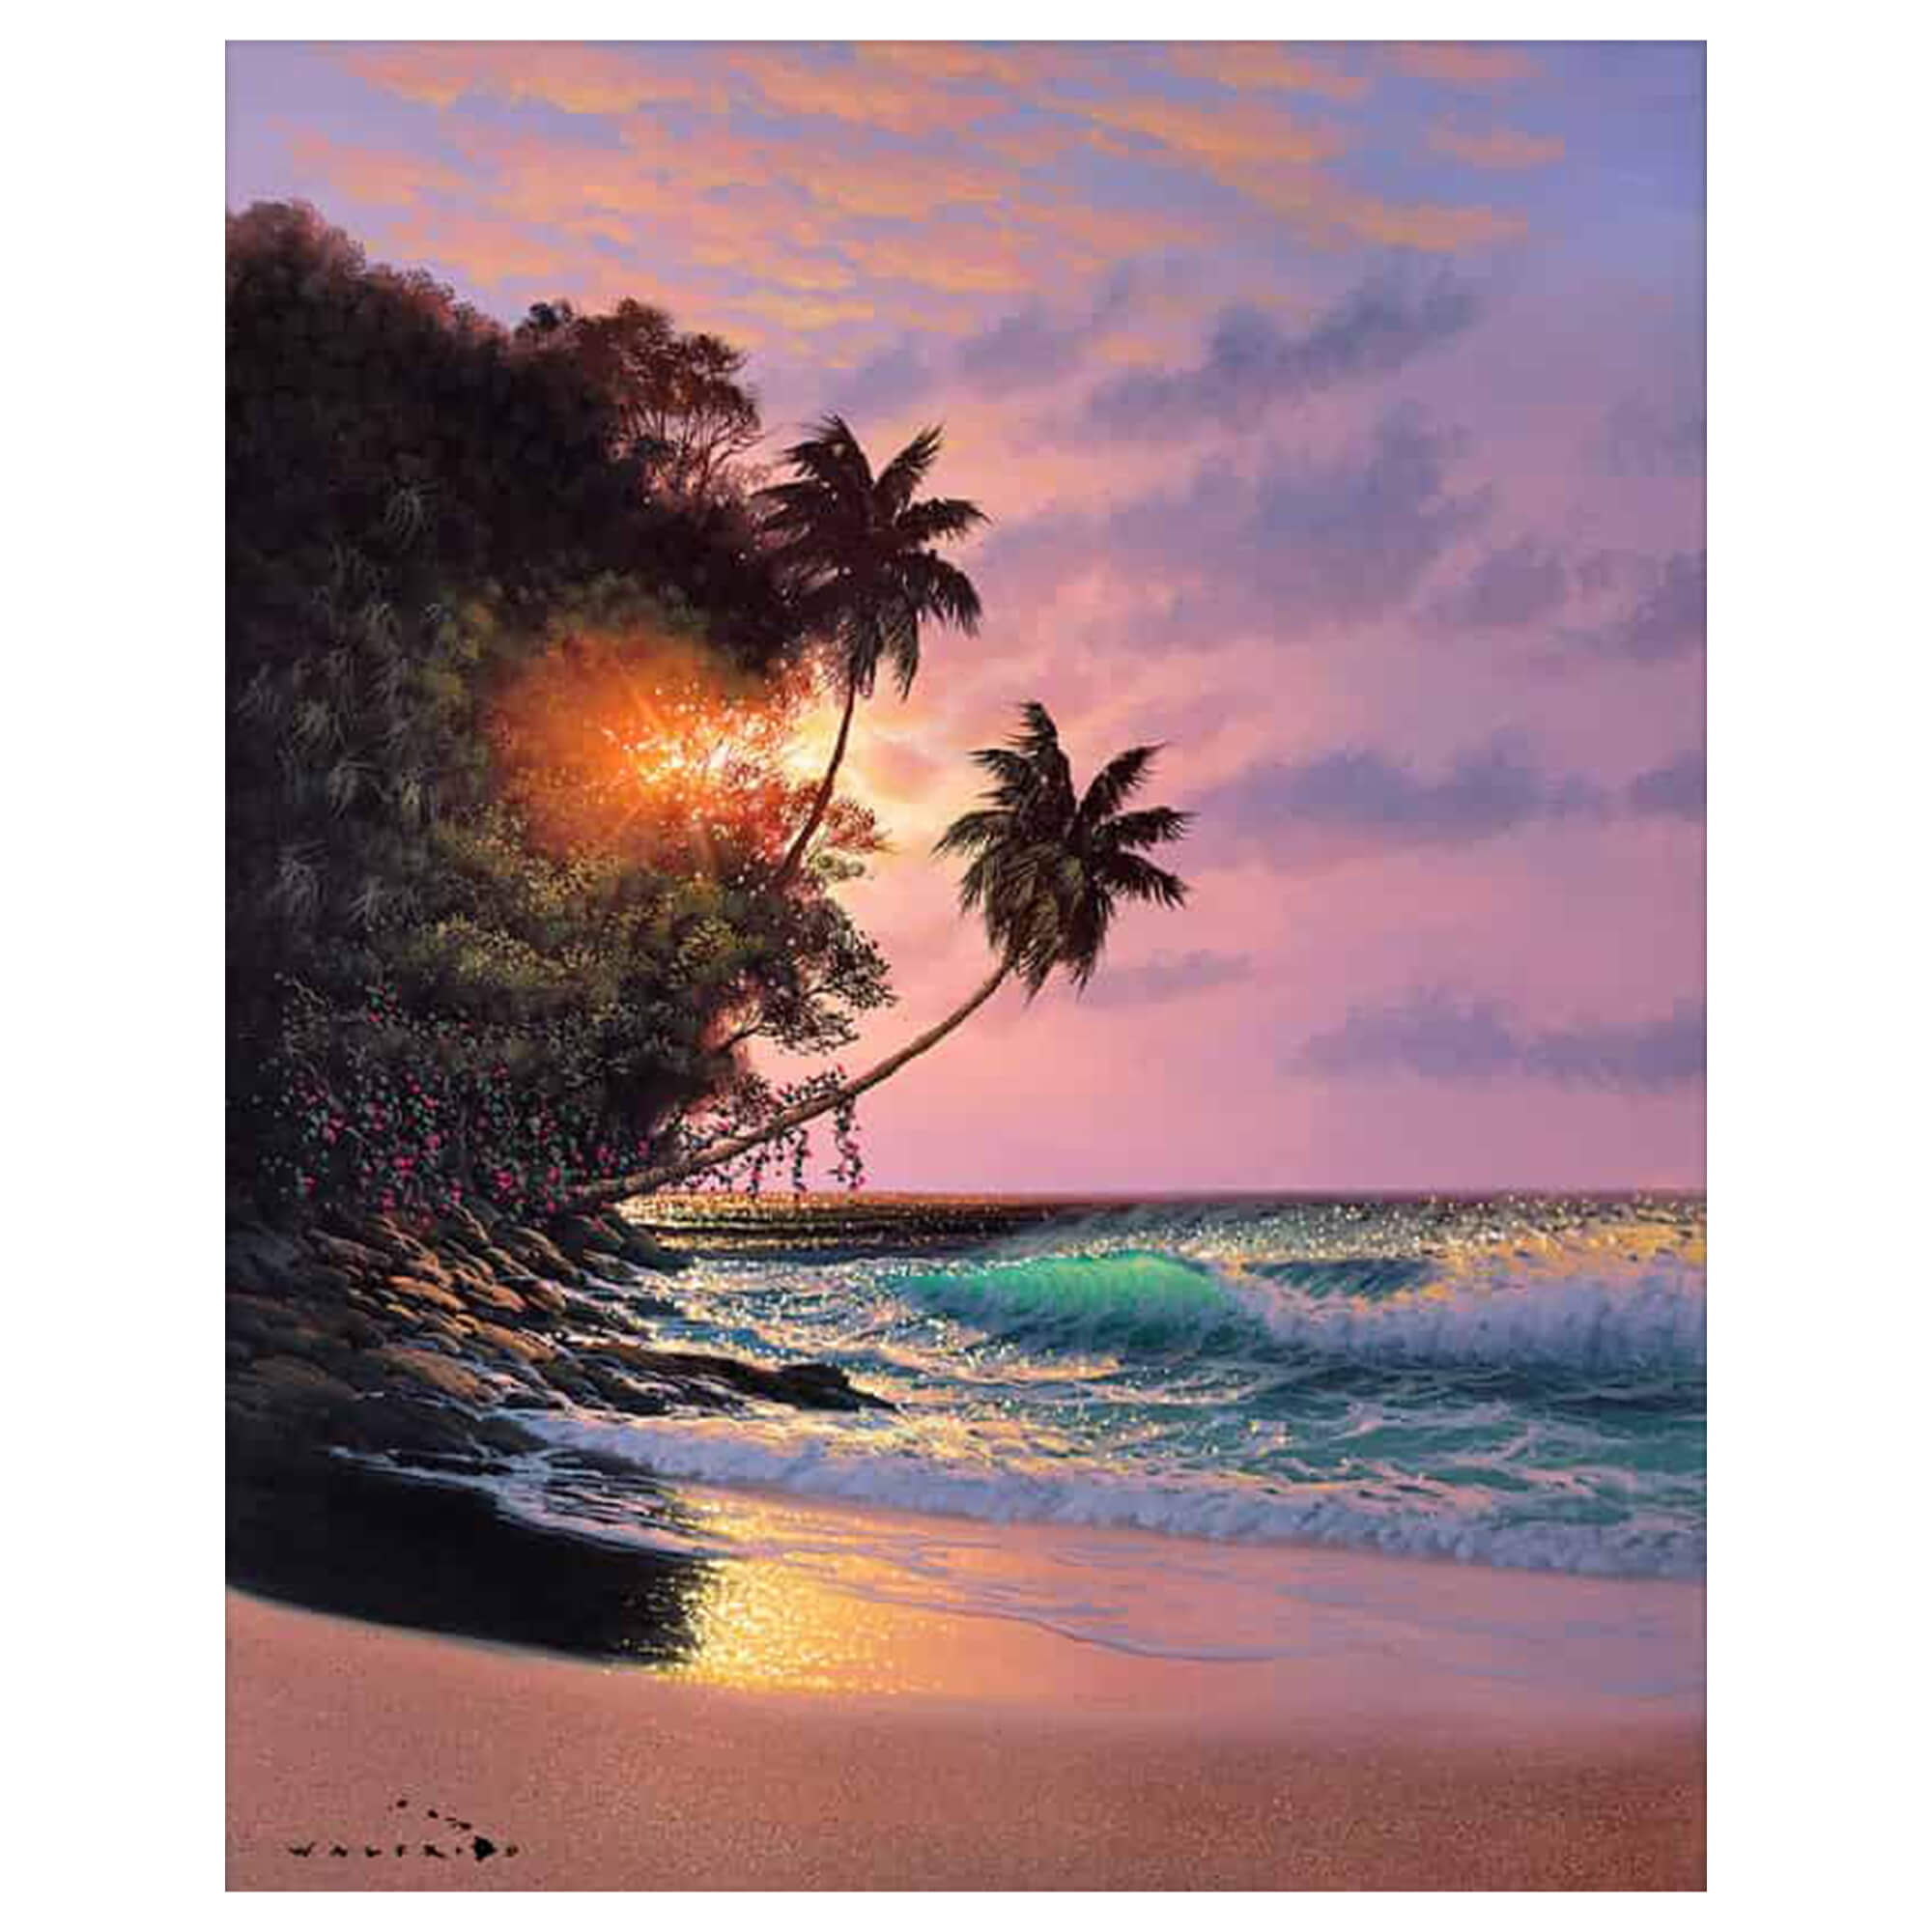 A matted art print of a seascape artwork that captures the beauty and raw essence of the natural world by Hawaii artist Walfrido Garcia